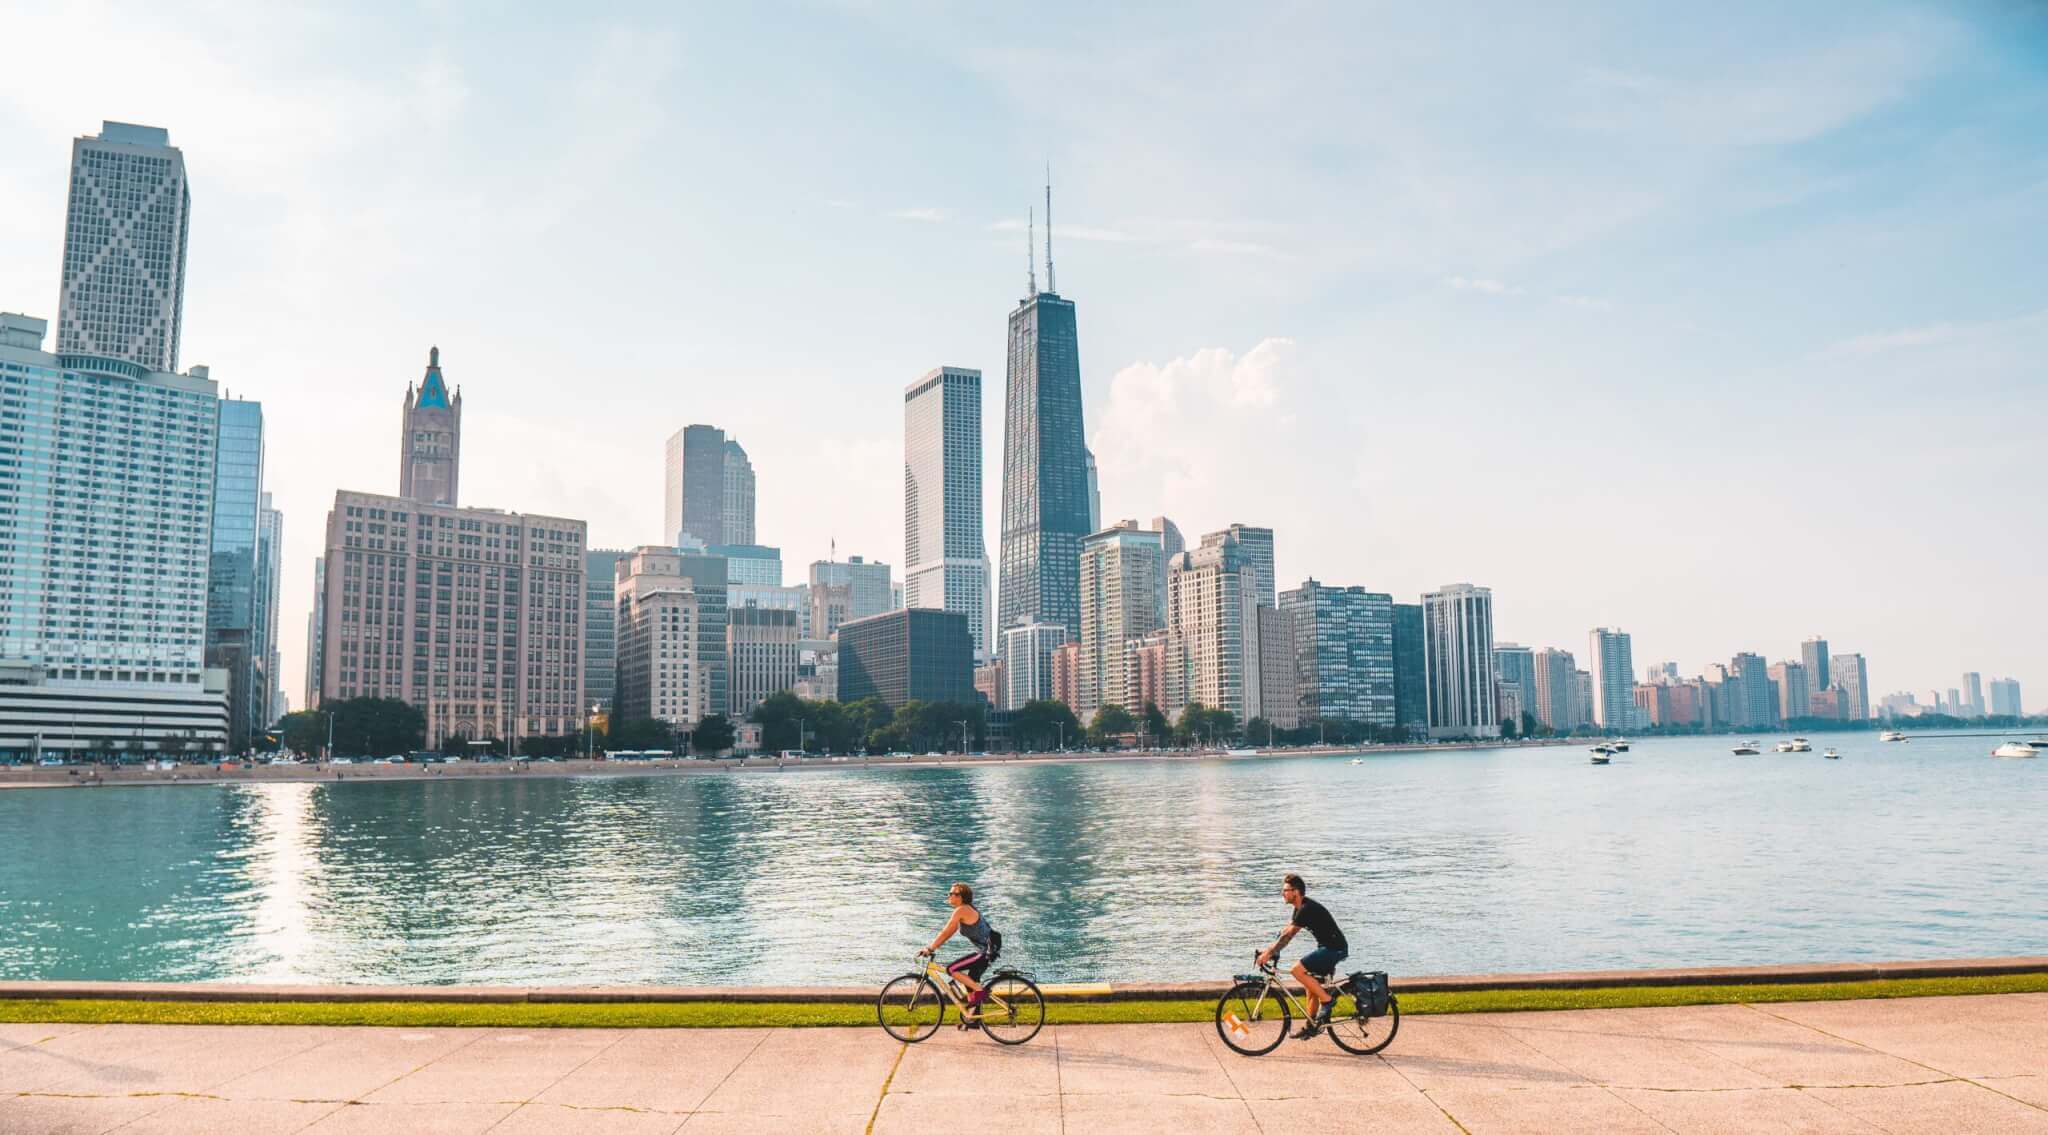 6 Best Locations for Engagement Photos in Chicago